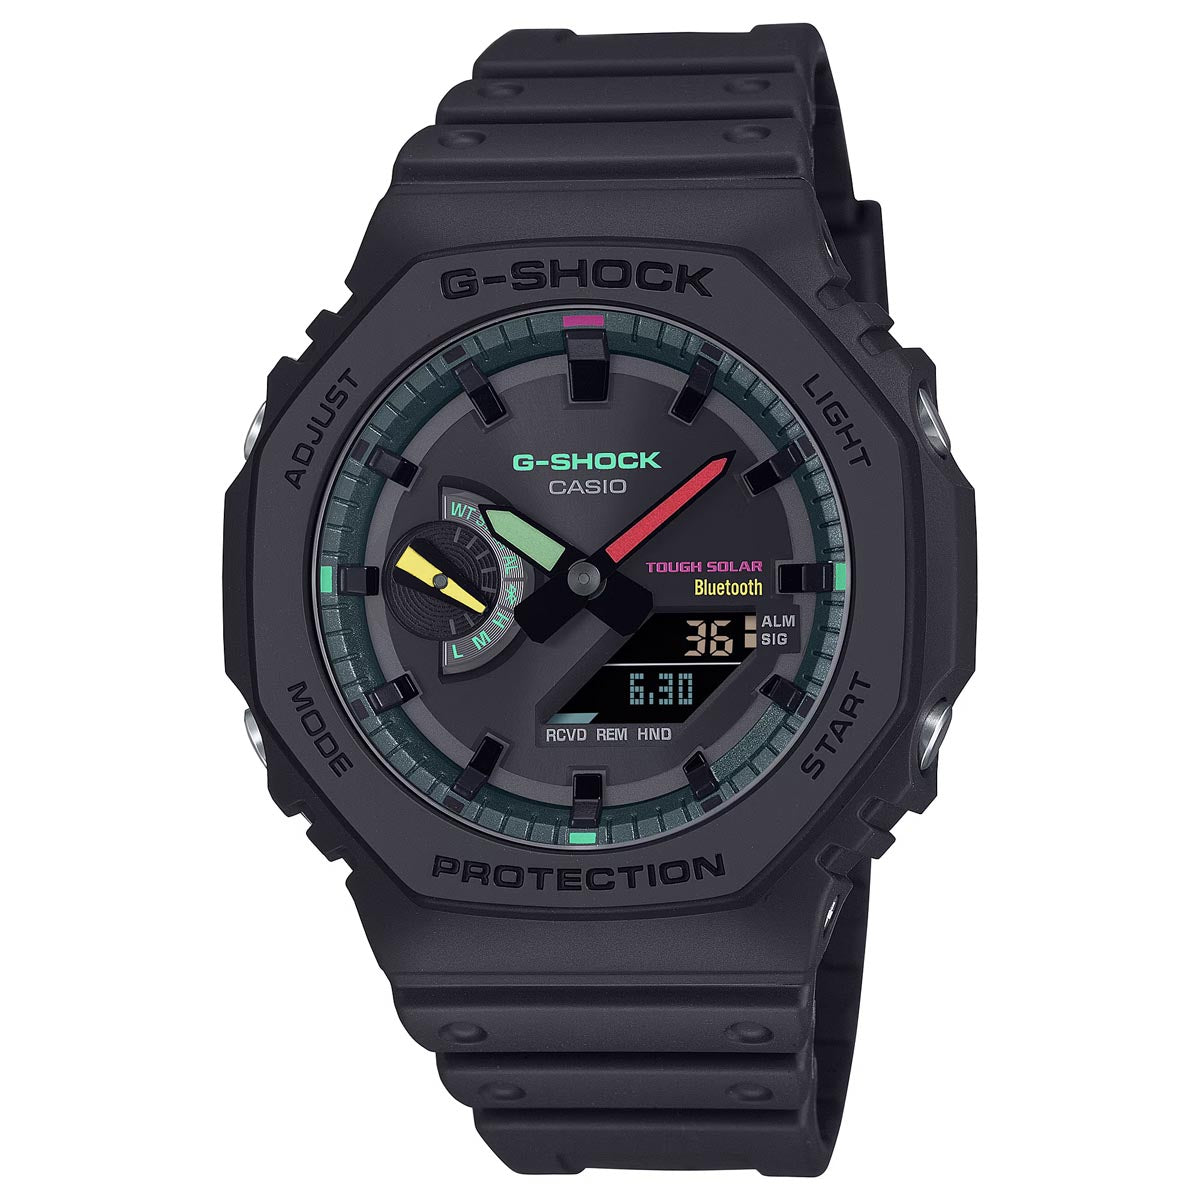 G-Shock 2100 Series Mens Watch with Black Dial with Multi Fluorescent Accents and Black Strap (solar movement)